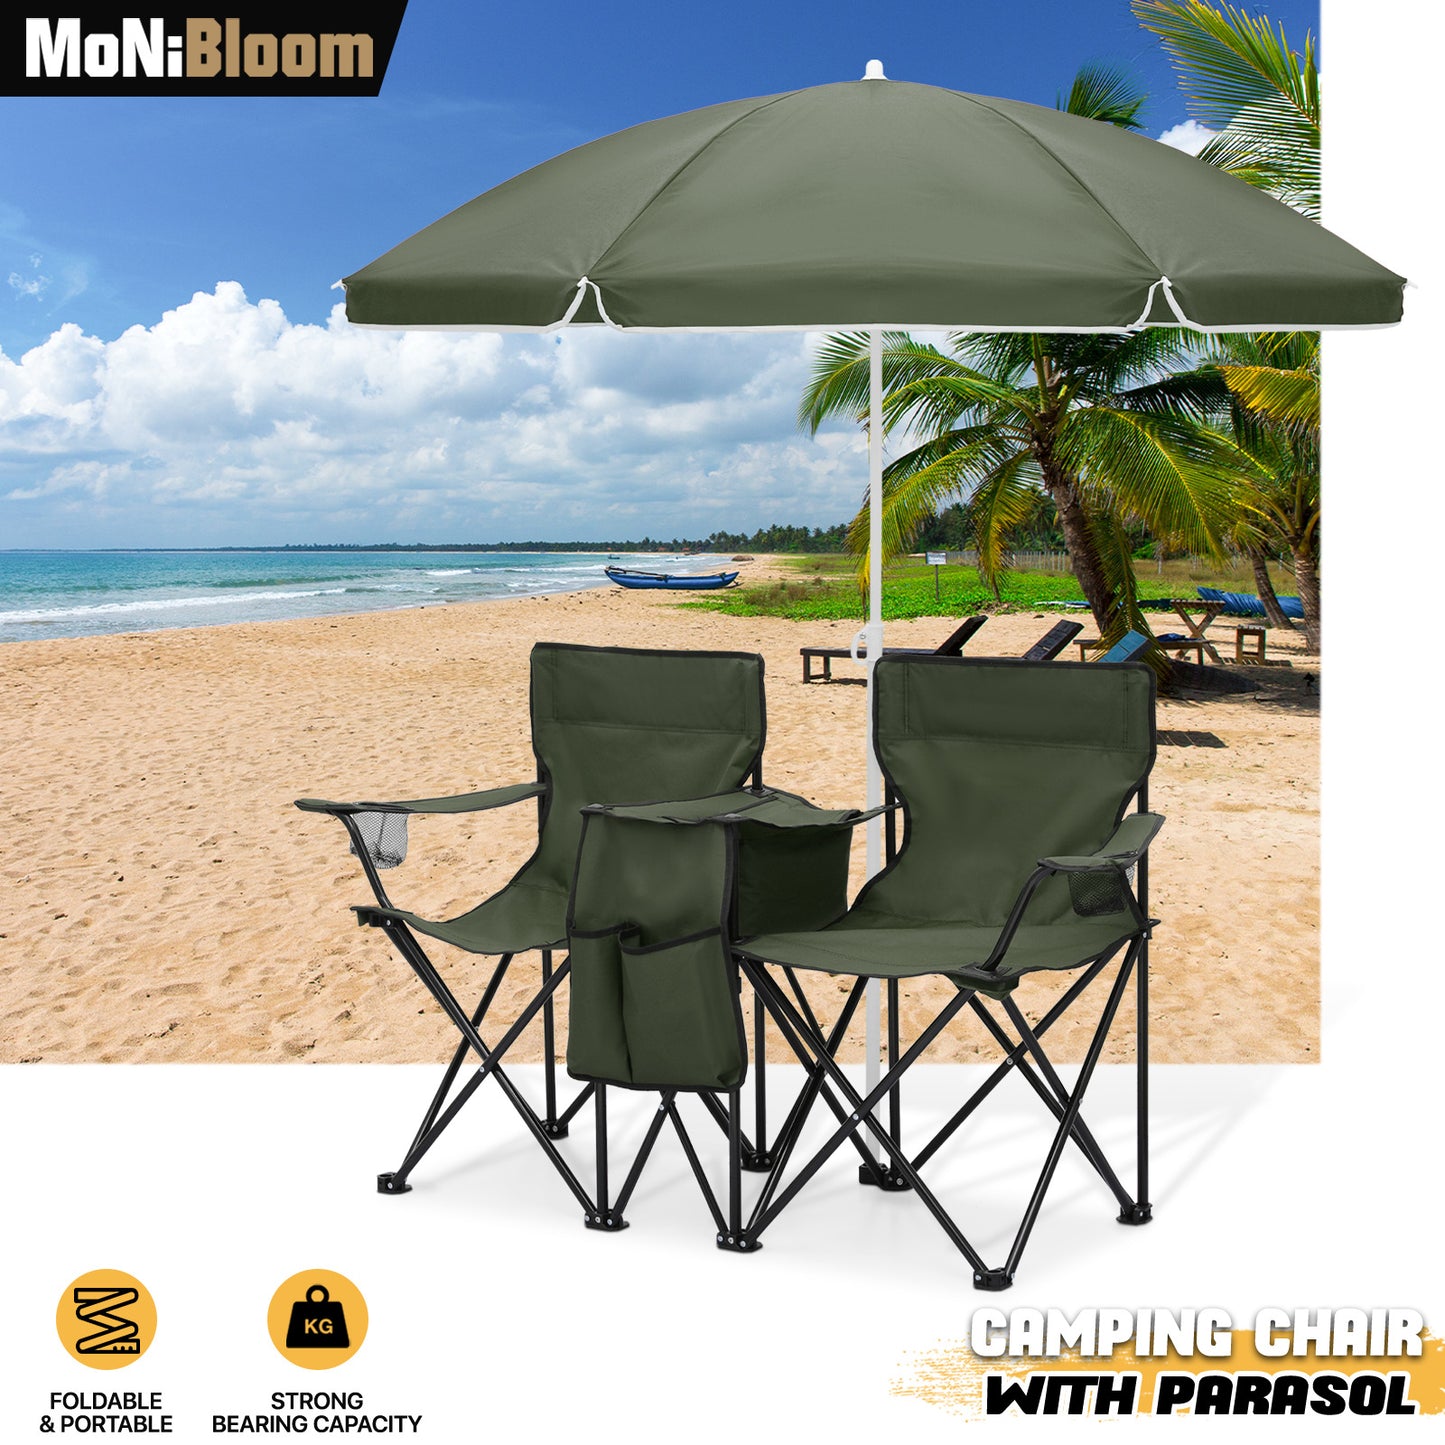 Double Chair With Umbrella - Steel Tube - Oxford Fabric